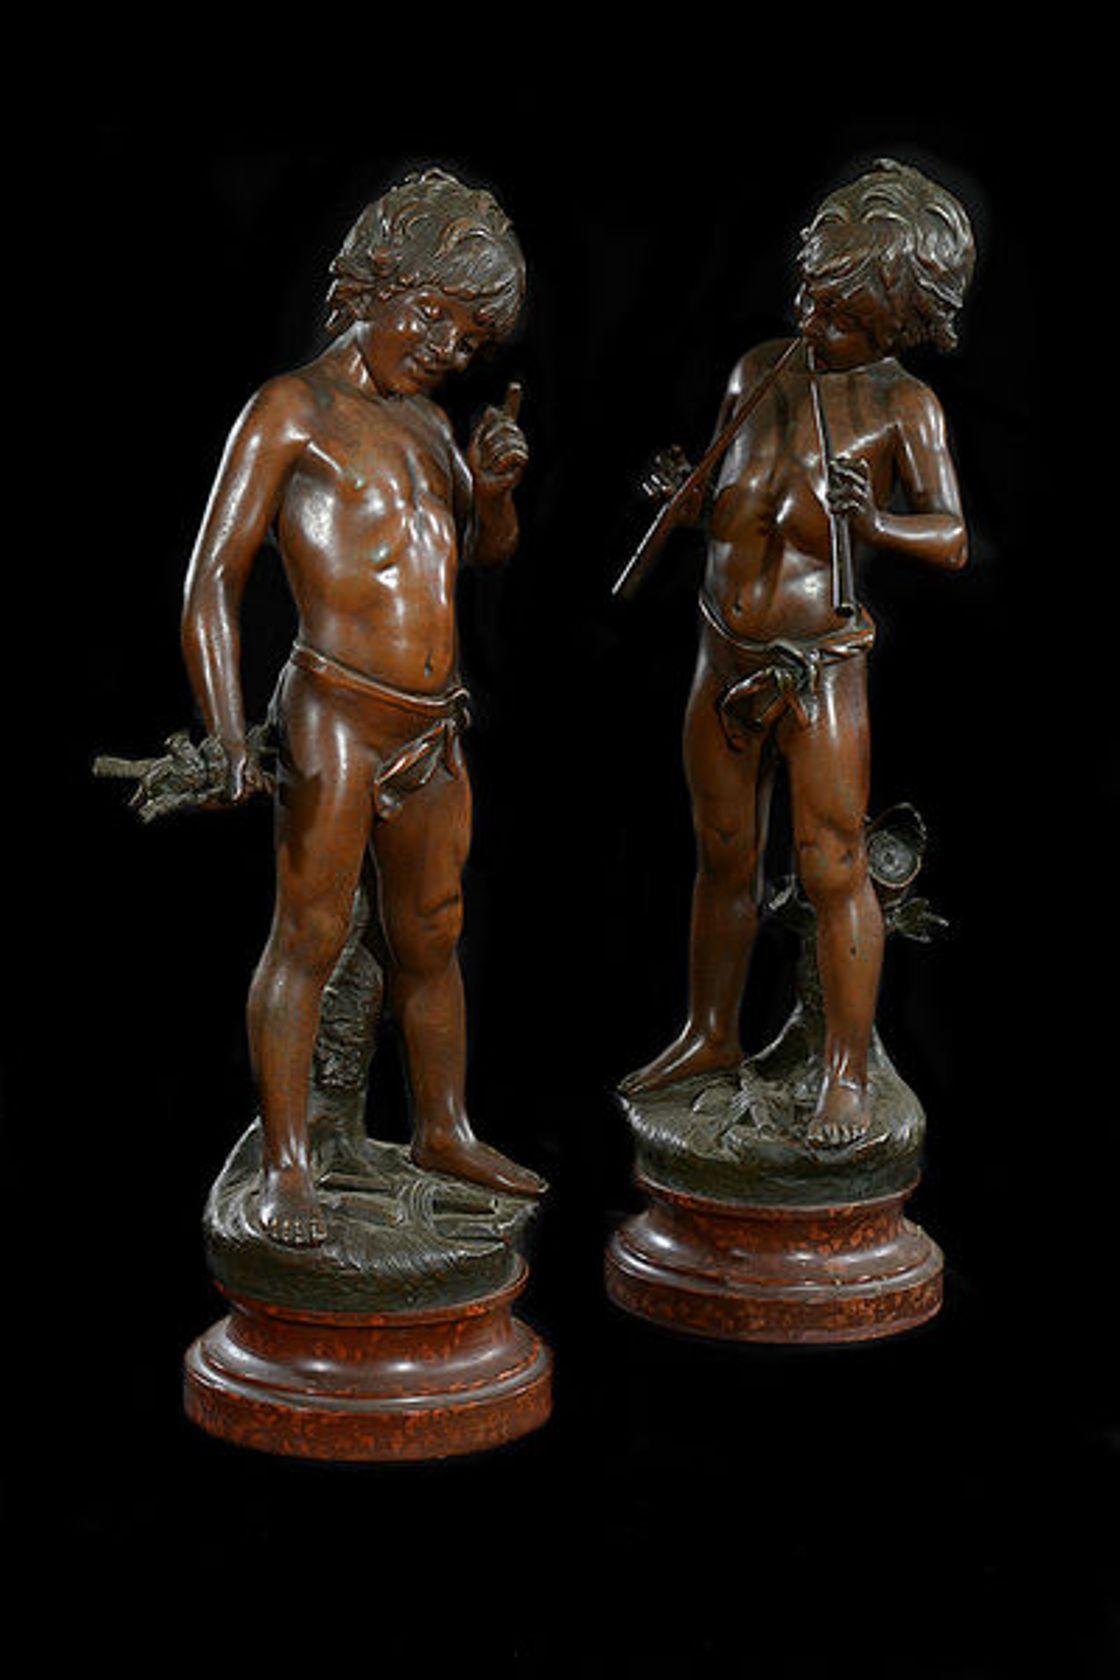 A pair of French late 19th century signed spelter figures of young boys.
One with a flute in each hand, the other holding two birds perched on twigs.
Each on a circular painted wooden stand that resembles variegated marble.
Signed and stamped in